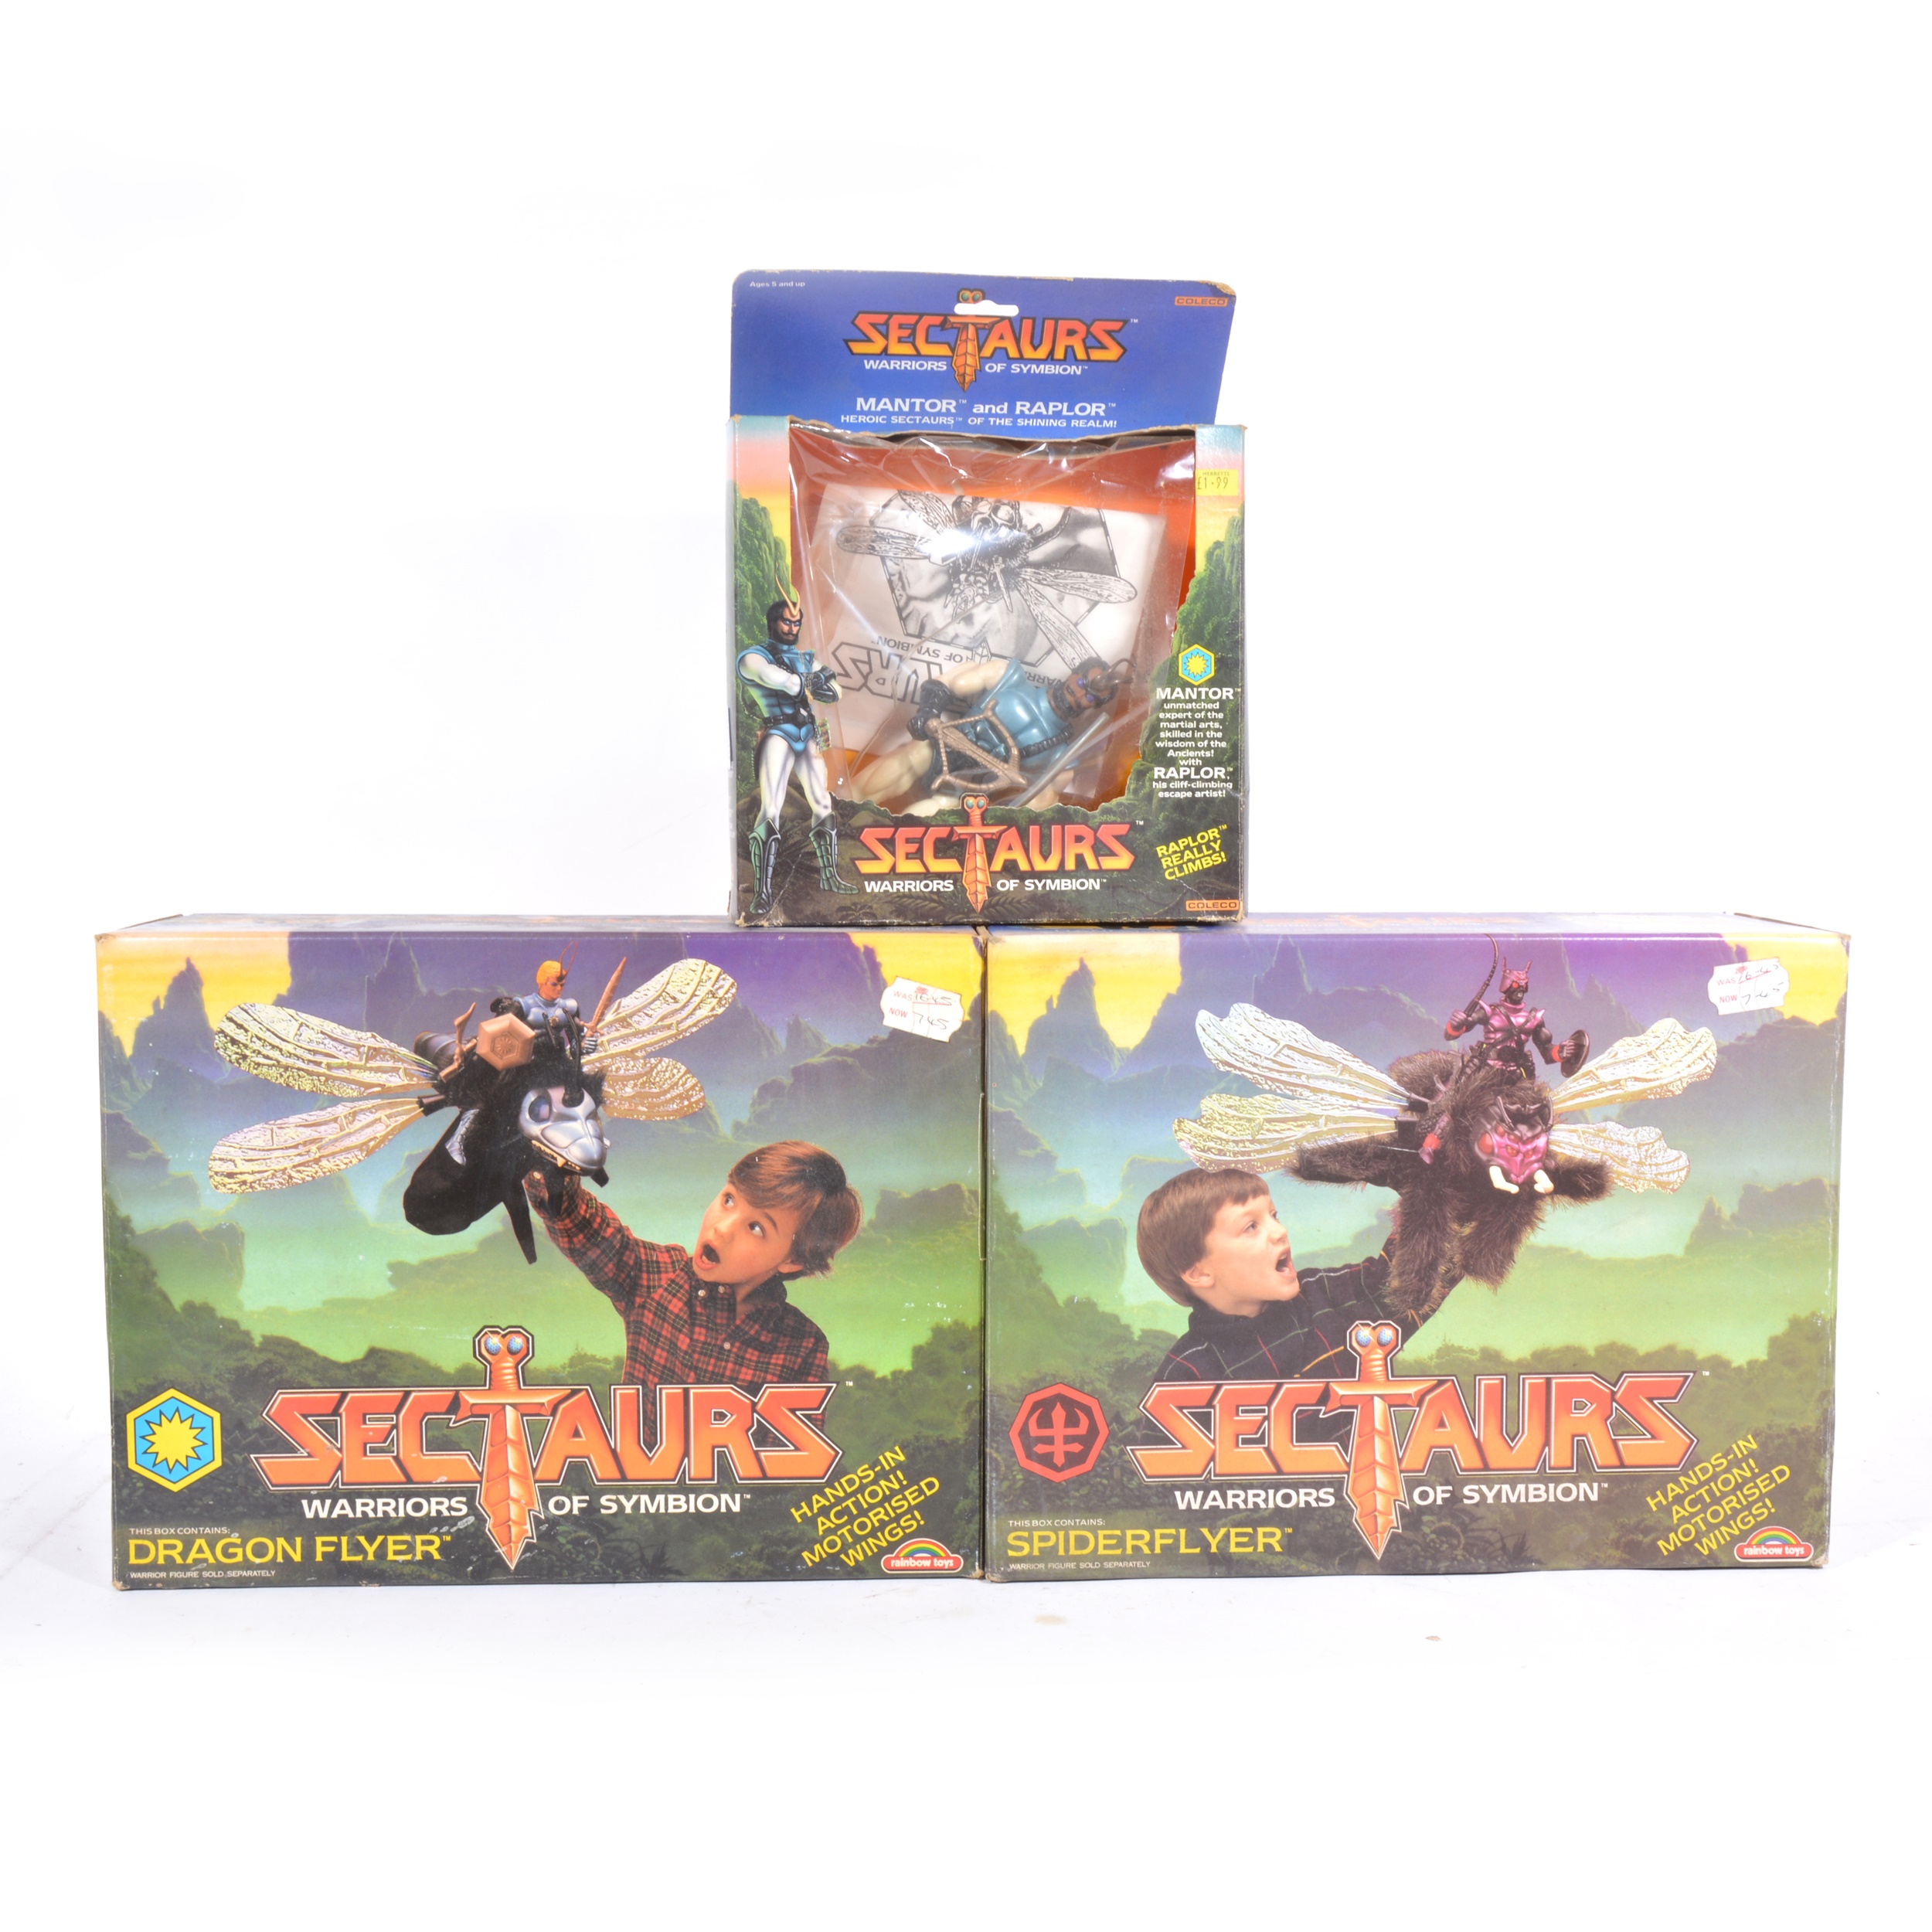 Sectaurs by Rainbow Toys; including Mantor action figure (missing Raplor), Dragonflyer and